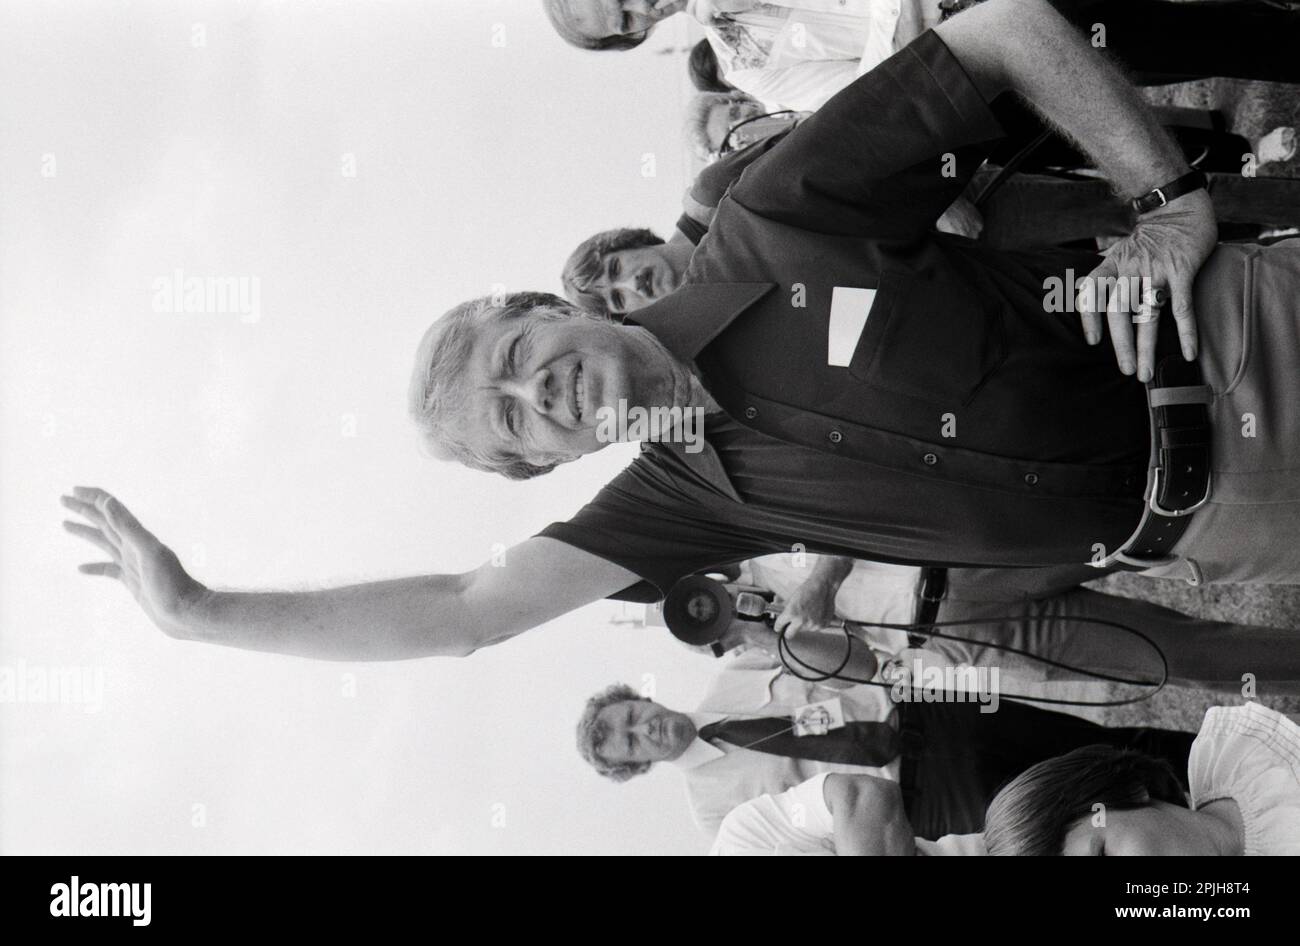 Jimmy Carter waves goodbye to Ohio Senator and former NASA astronaut John Glenn at the Plains, Georgia airport after interviewing him as a possible vice presidential running mate. - To license this image, click on the shopping cart below - Stock Photo